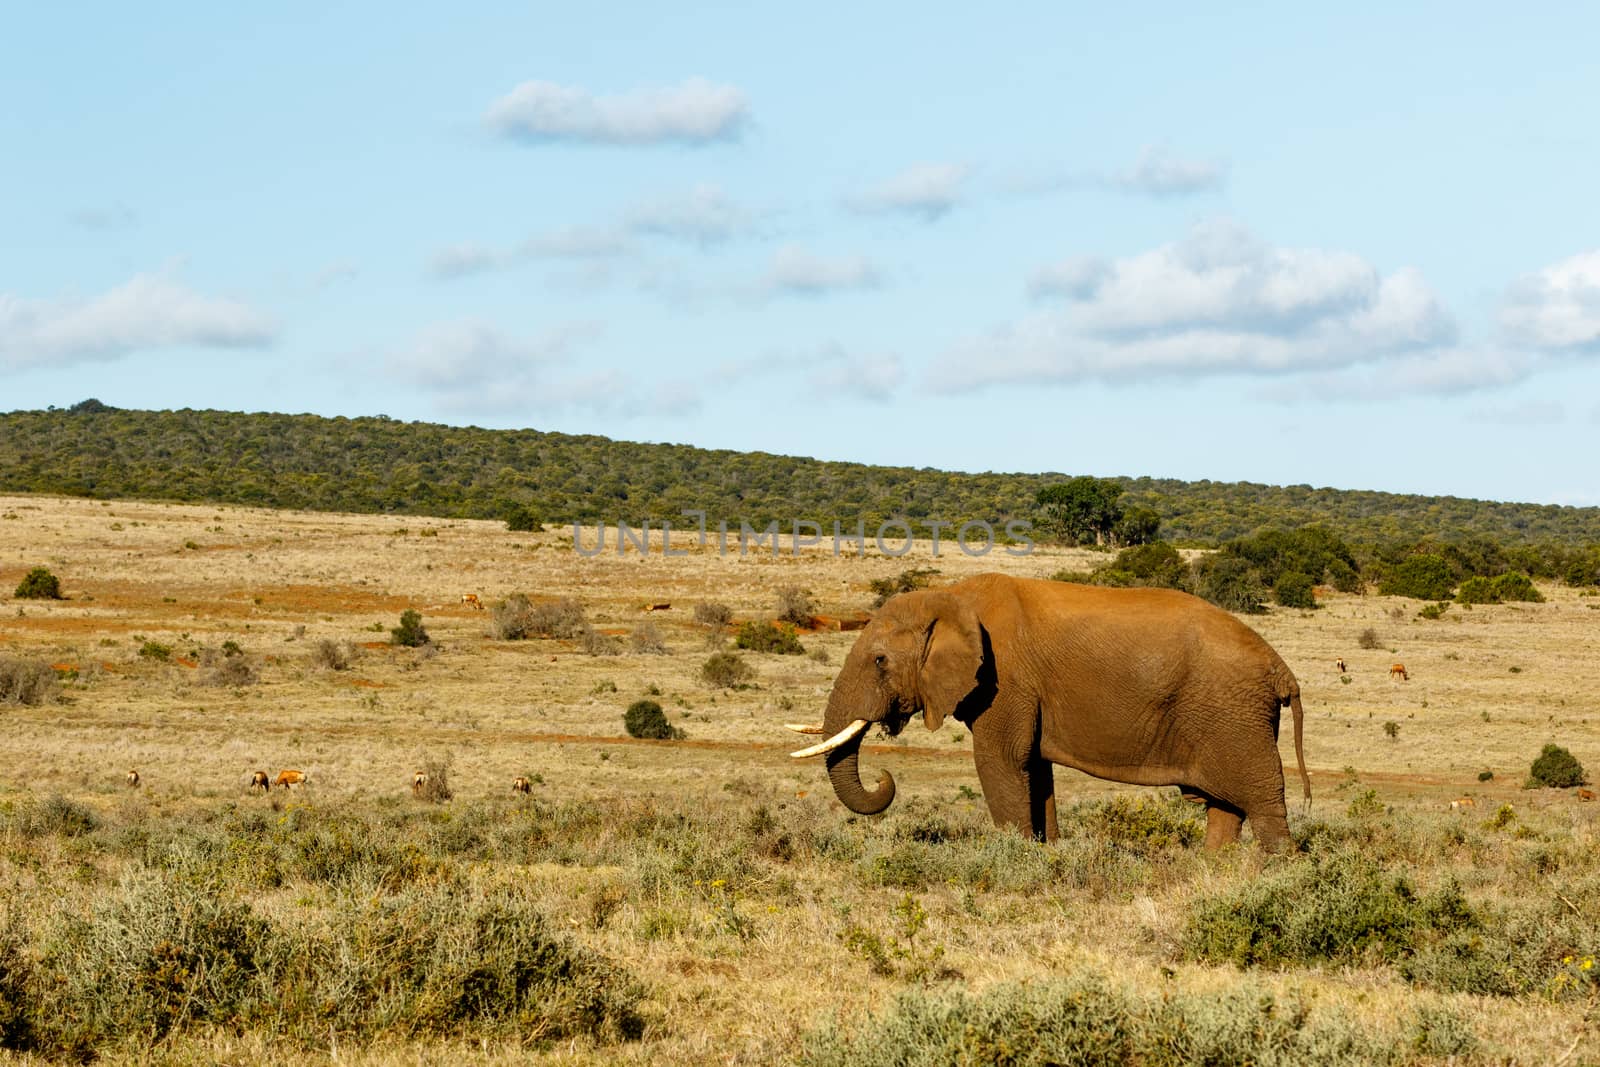 Blue Cloudy Skies with and African Bush Elephant Standing in a large field.